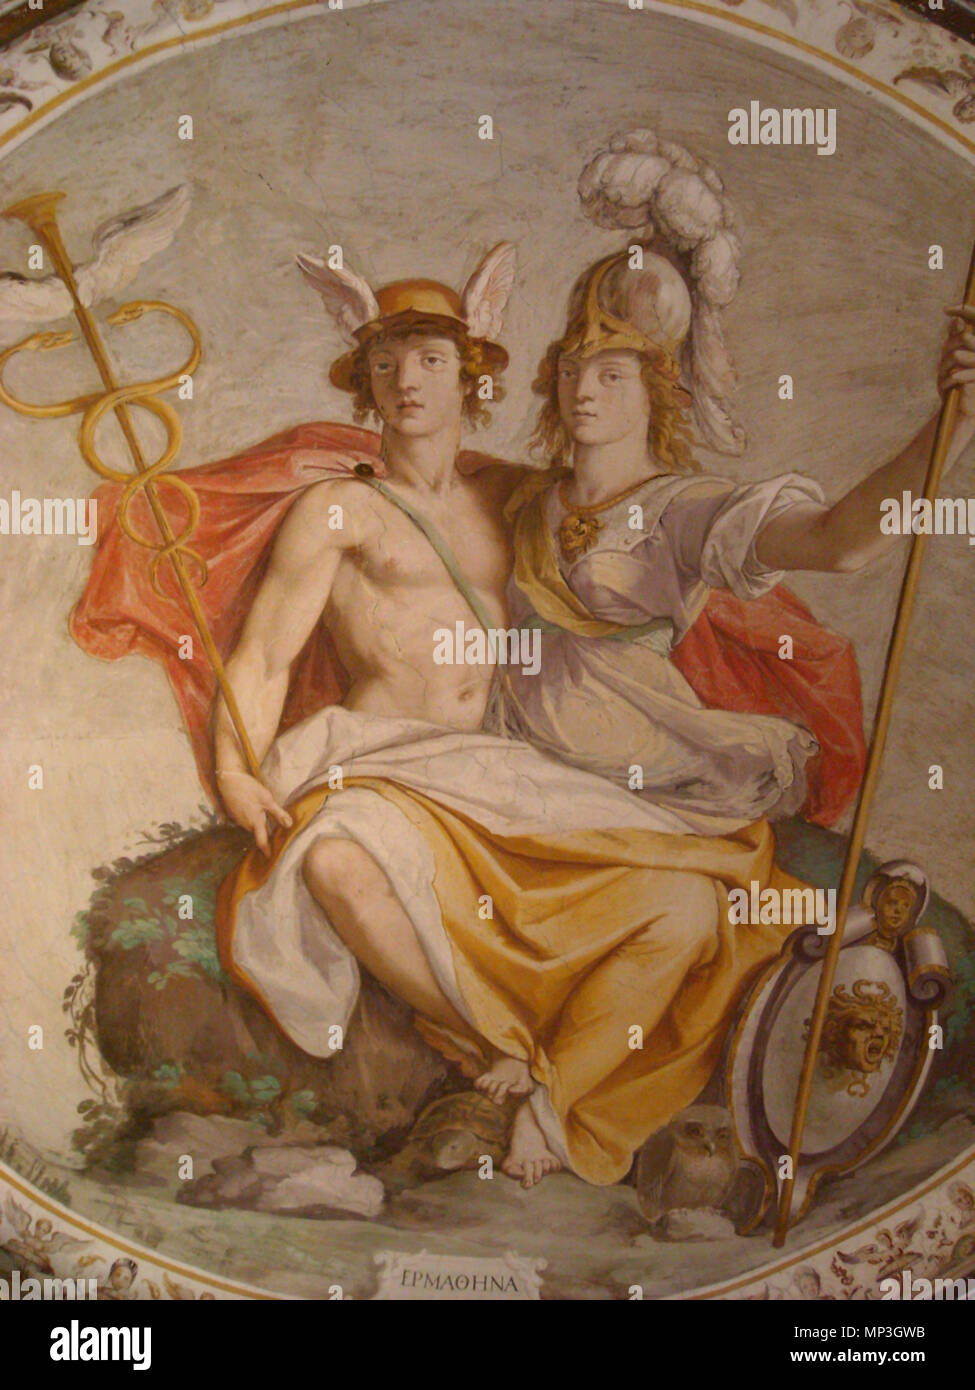 . Dedicated to the study room. Decorated with Hermes and Athena (in Roman mythology Mercury and Minerva), presides over the dome, while the crests are instruments of science and the arts. All this was done by Federico Zuccaro between 1566 and 1569. The representation of these two gods, or fused together as a single form (Hermathena), was widely used in classical iconography, as Hermes represented eloquence and Athena wisdom, the arts and sciences. between 1566 and 1569.    Federico Zuccari  (1539–1609)      Alternative names Federico Zuccari  Description Italian painter and architect  Date of  Stock Photo